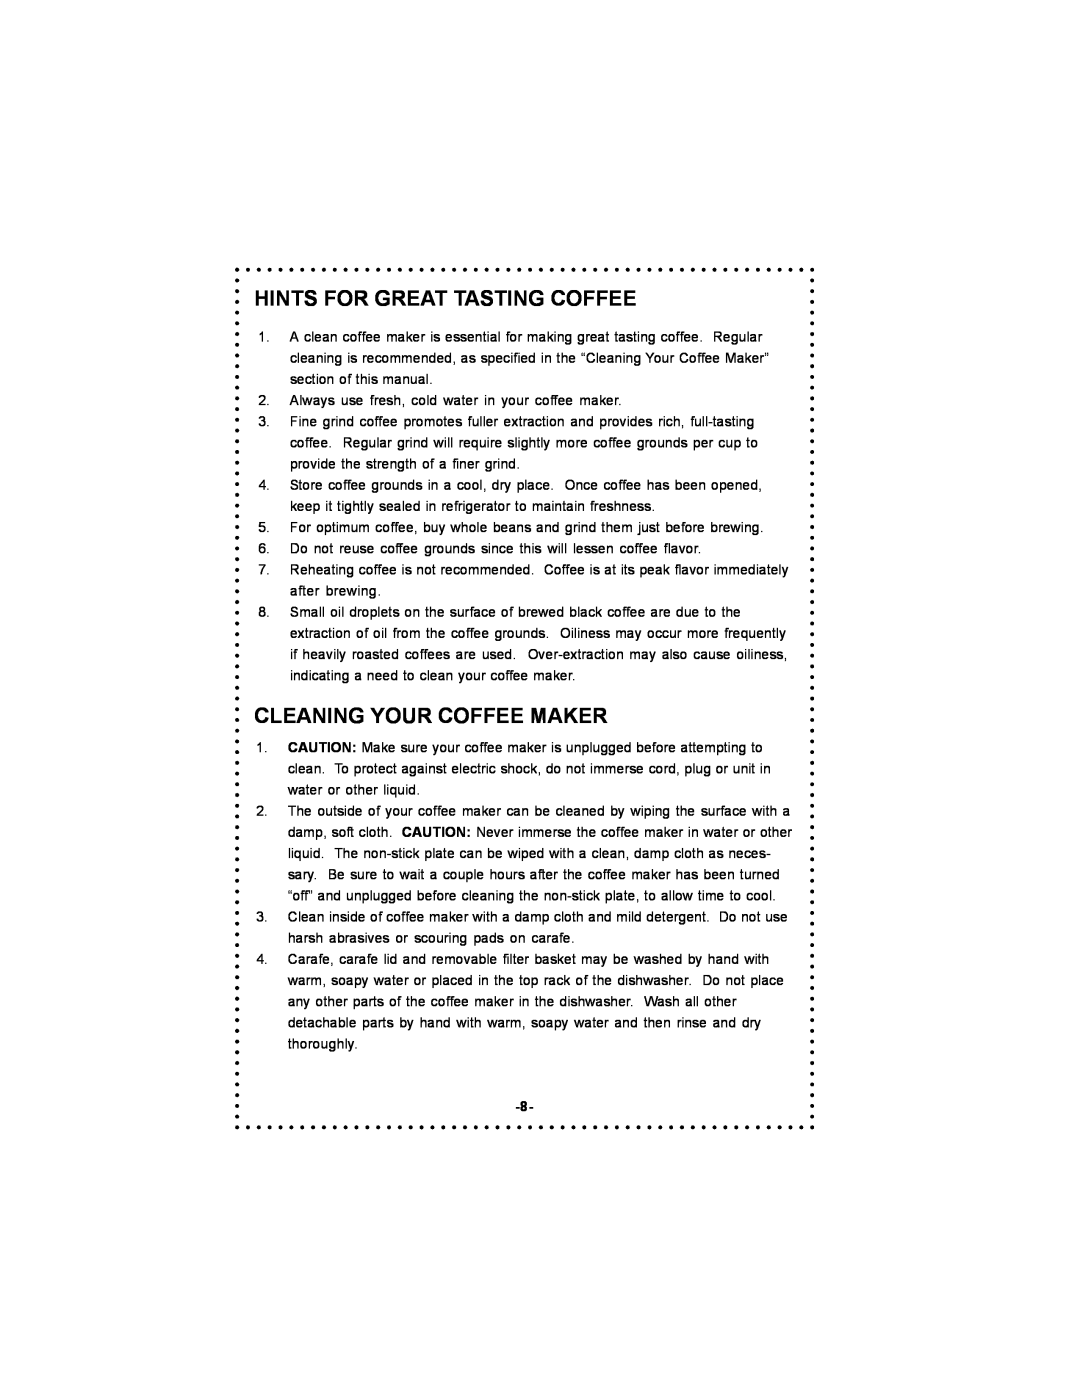 DeLonghi Coffee Makers instruction manual Hints For Great Tasting Coffee, Cleaning Your Coffee Maker 